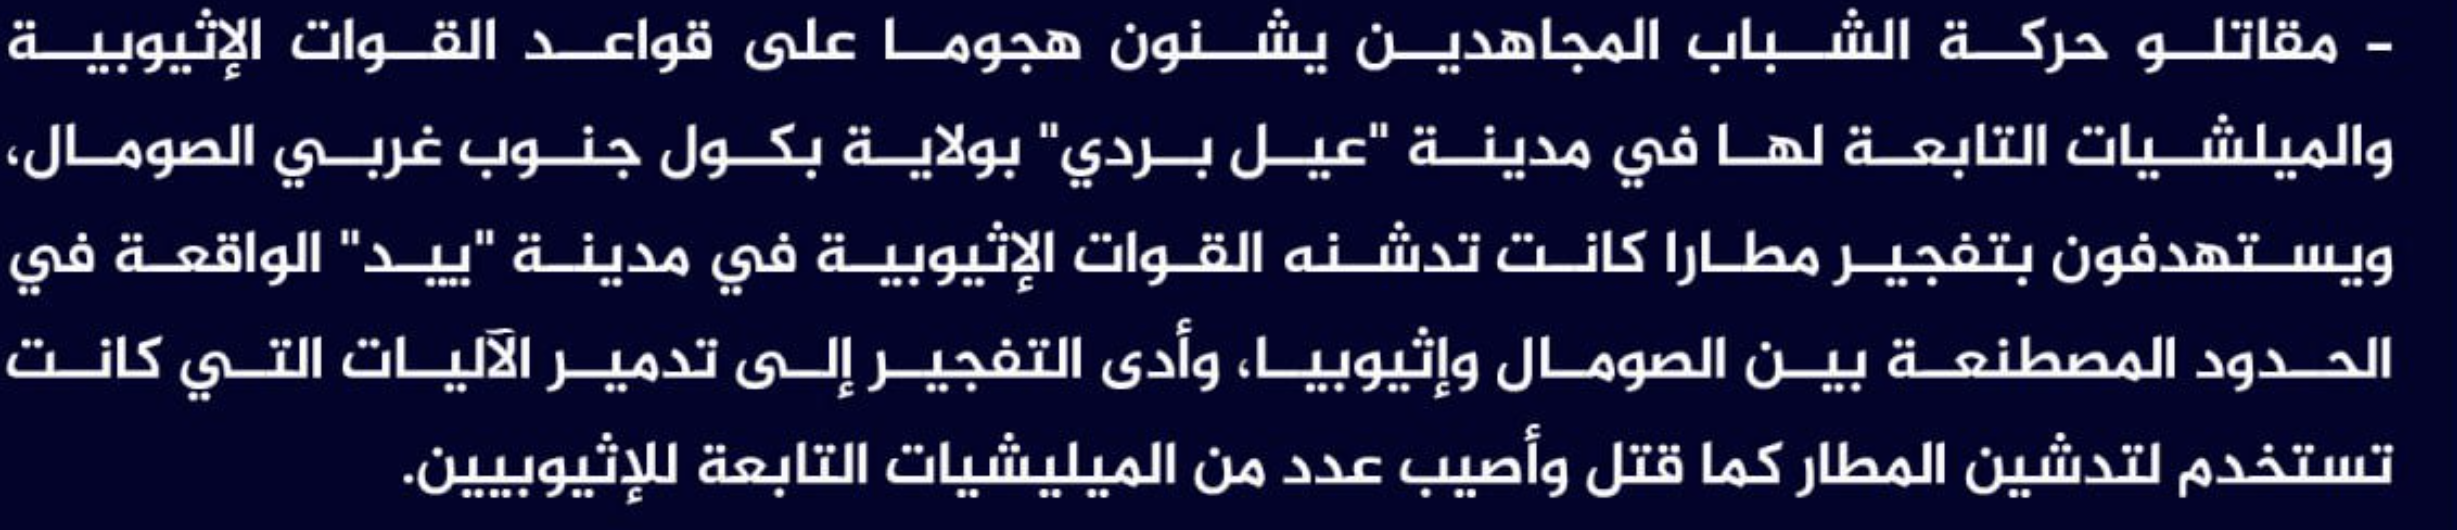 (Claim) al-Shabaab Ambushed Ethiopian and Somalian Forces Bases in Eil Bardi City, Bakool Province, Southwestern Somalia as well as Targeted an Ethiopian Airport with IED in Bayed City on the border Between Somalia and Ethiopia - 21 March 2023